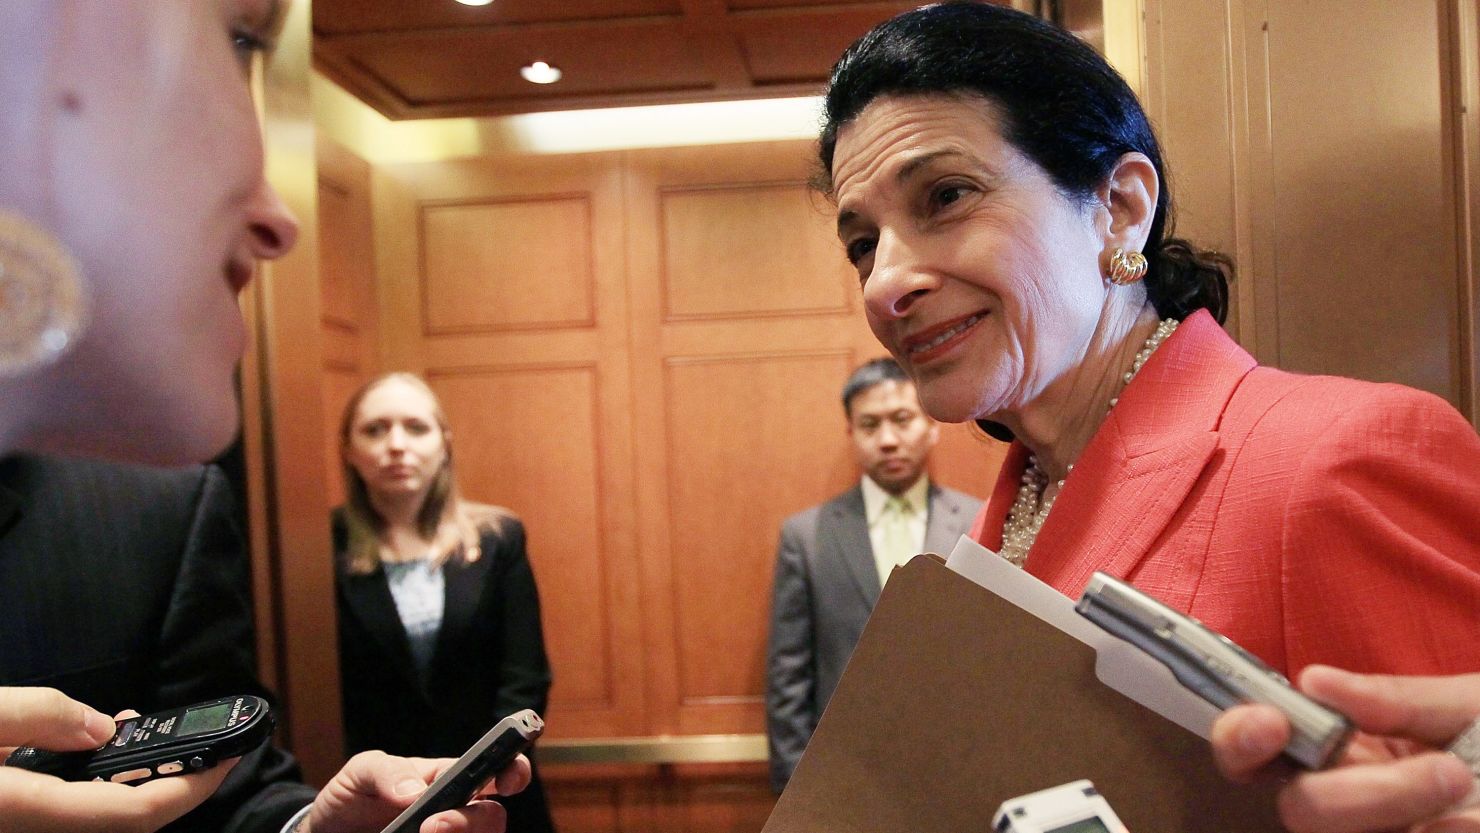 U.S. Sen. Olympia Snowe, who announced this week that she would not seek reelection.